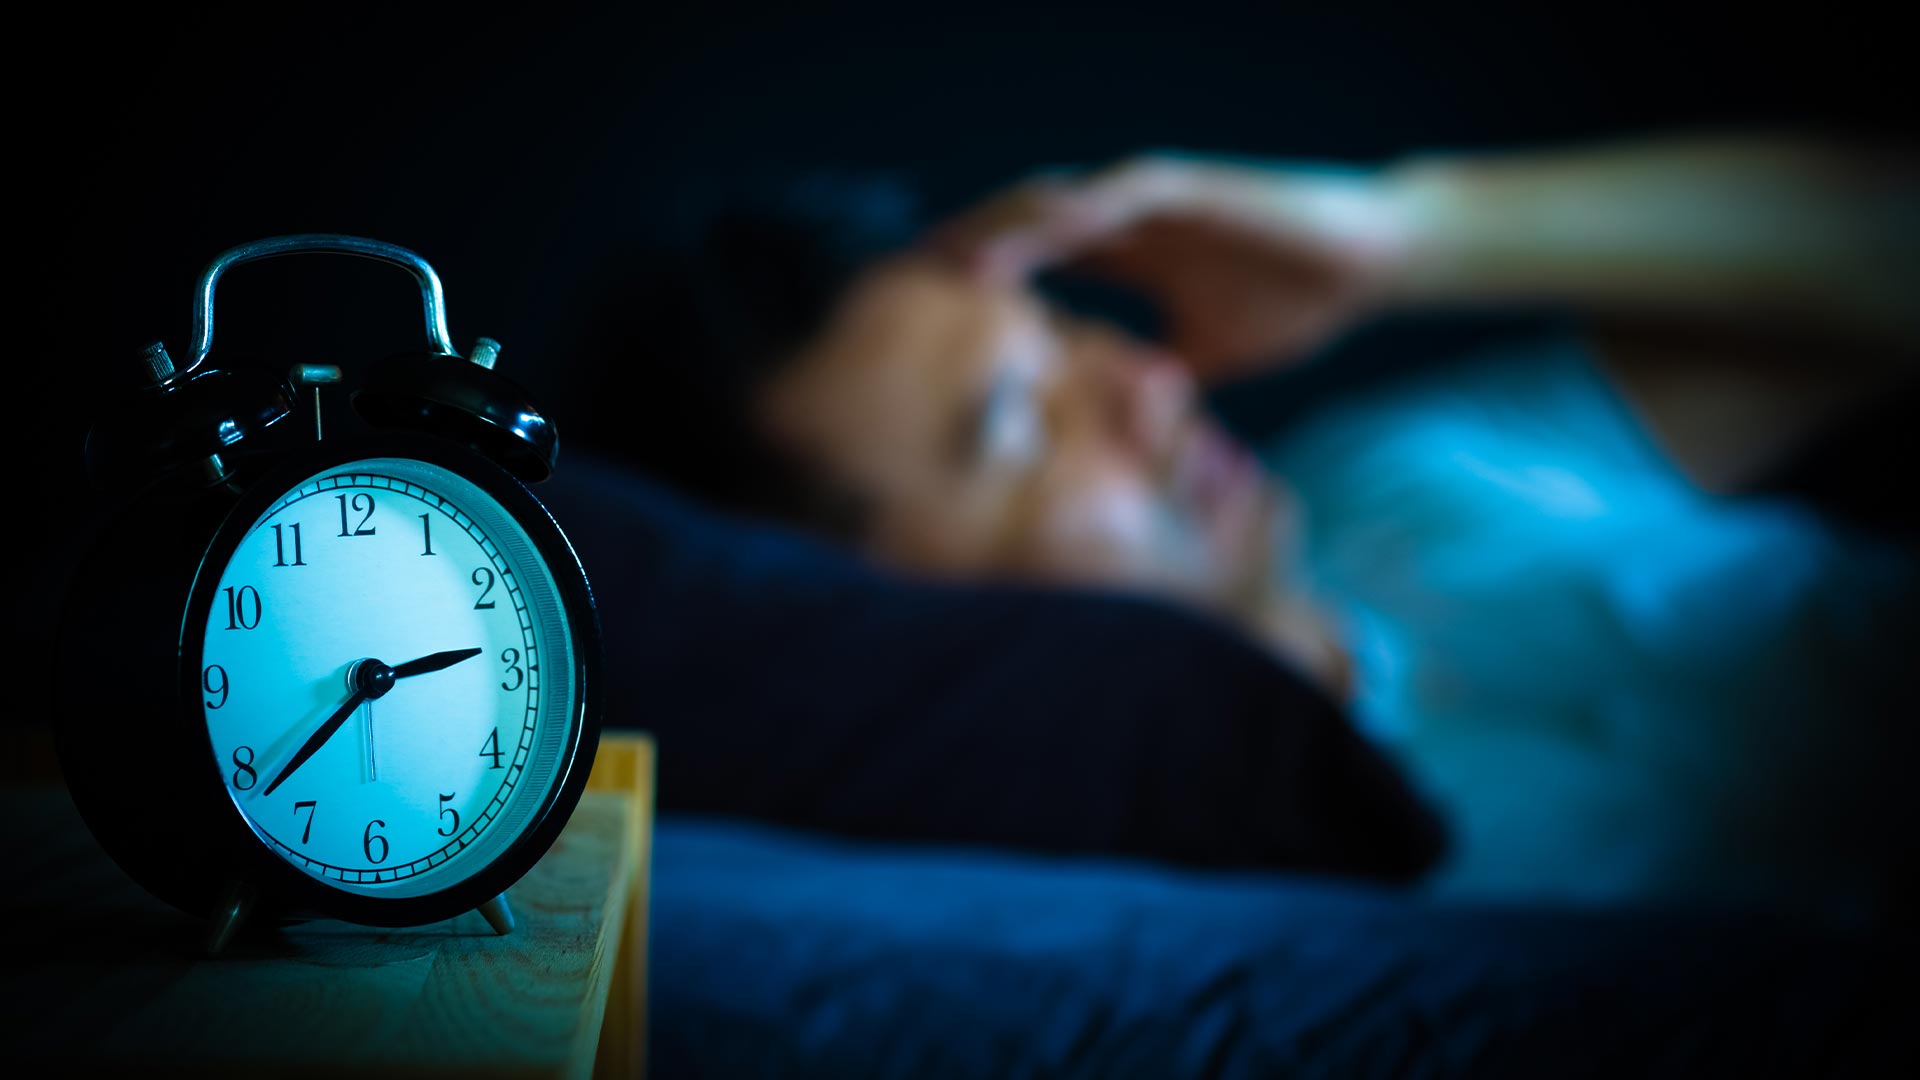 Can’t sleep? Here are 6 tips to help you fall asleep and stop worrying late at night.